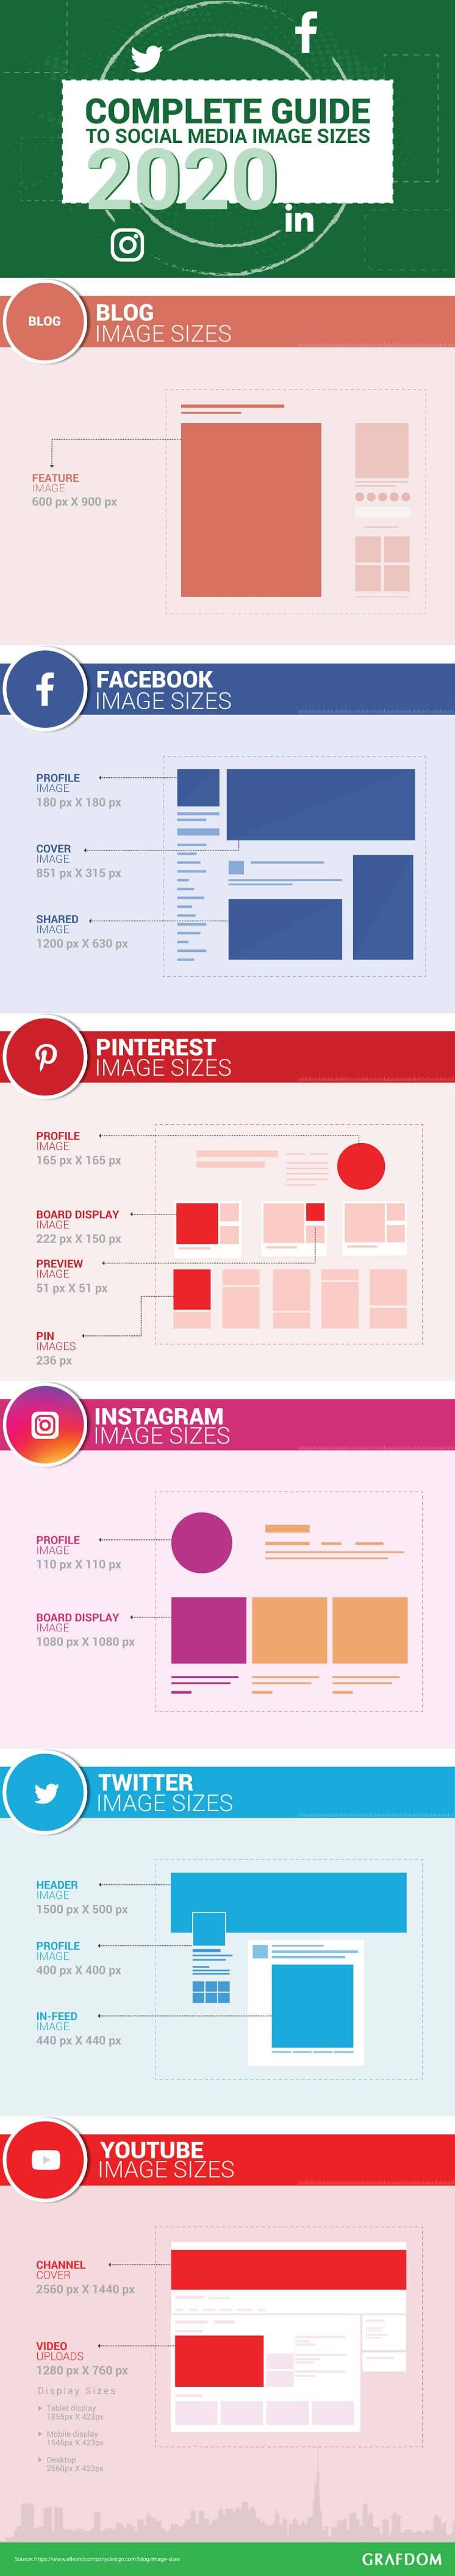 Social Media Image Sizes – Cheat Sheet 2020 Complete #infographic